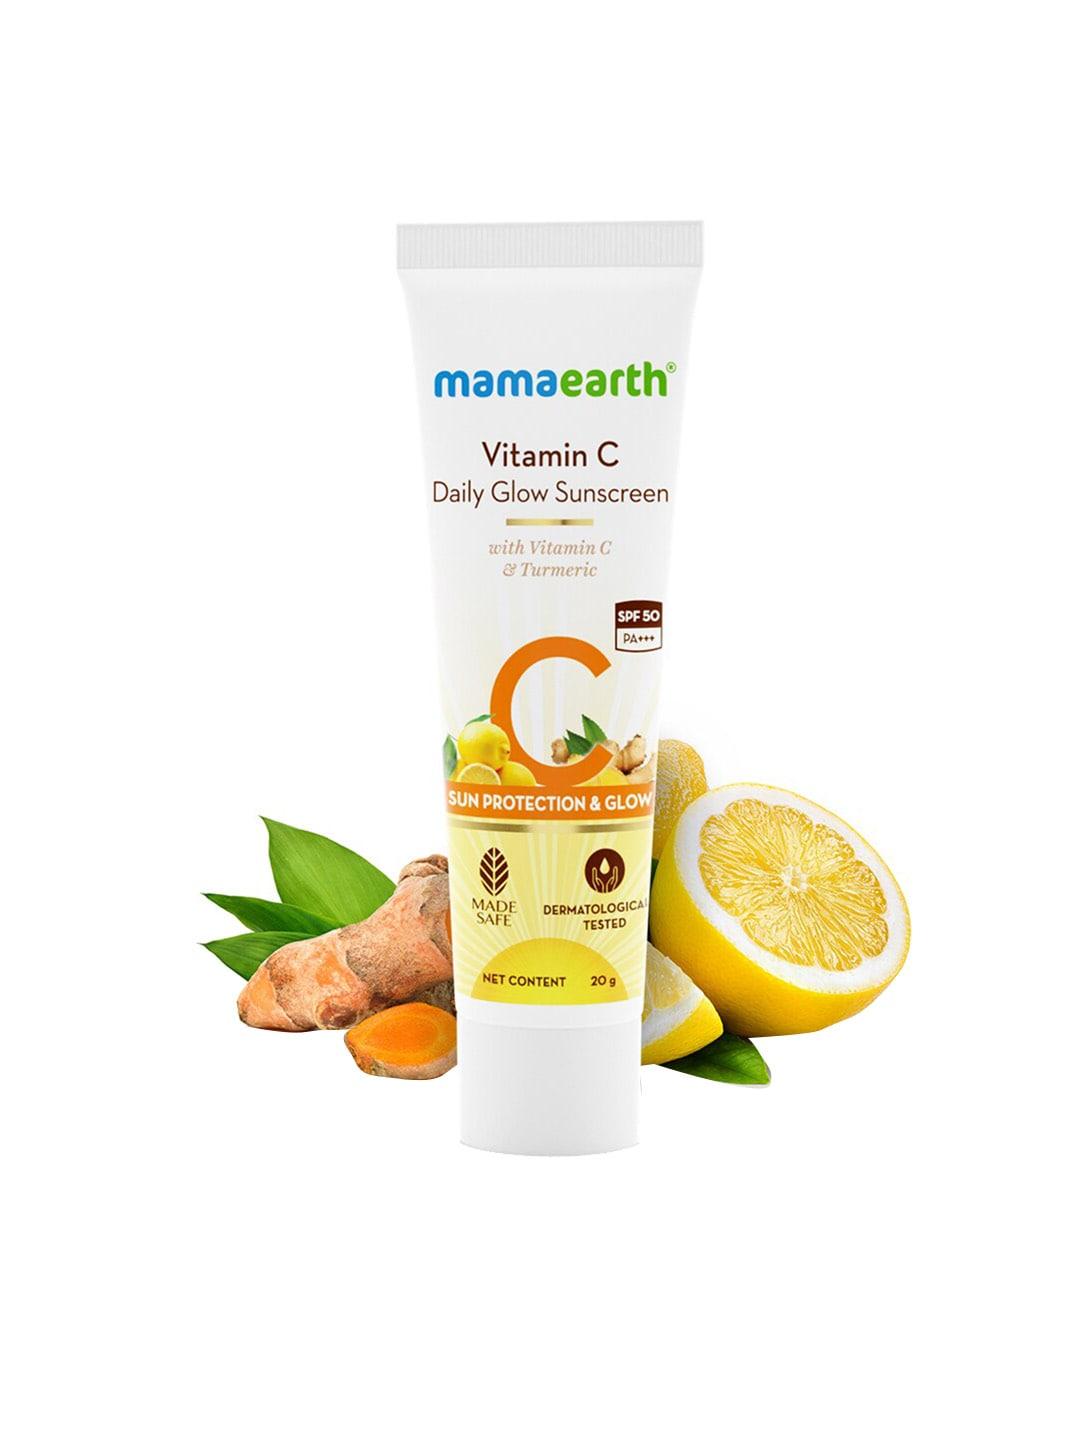 mamaearth-vitamin-c-daily-glow-spf50-sunscreen-with-turmeric-for-sun-protection---20g